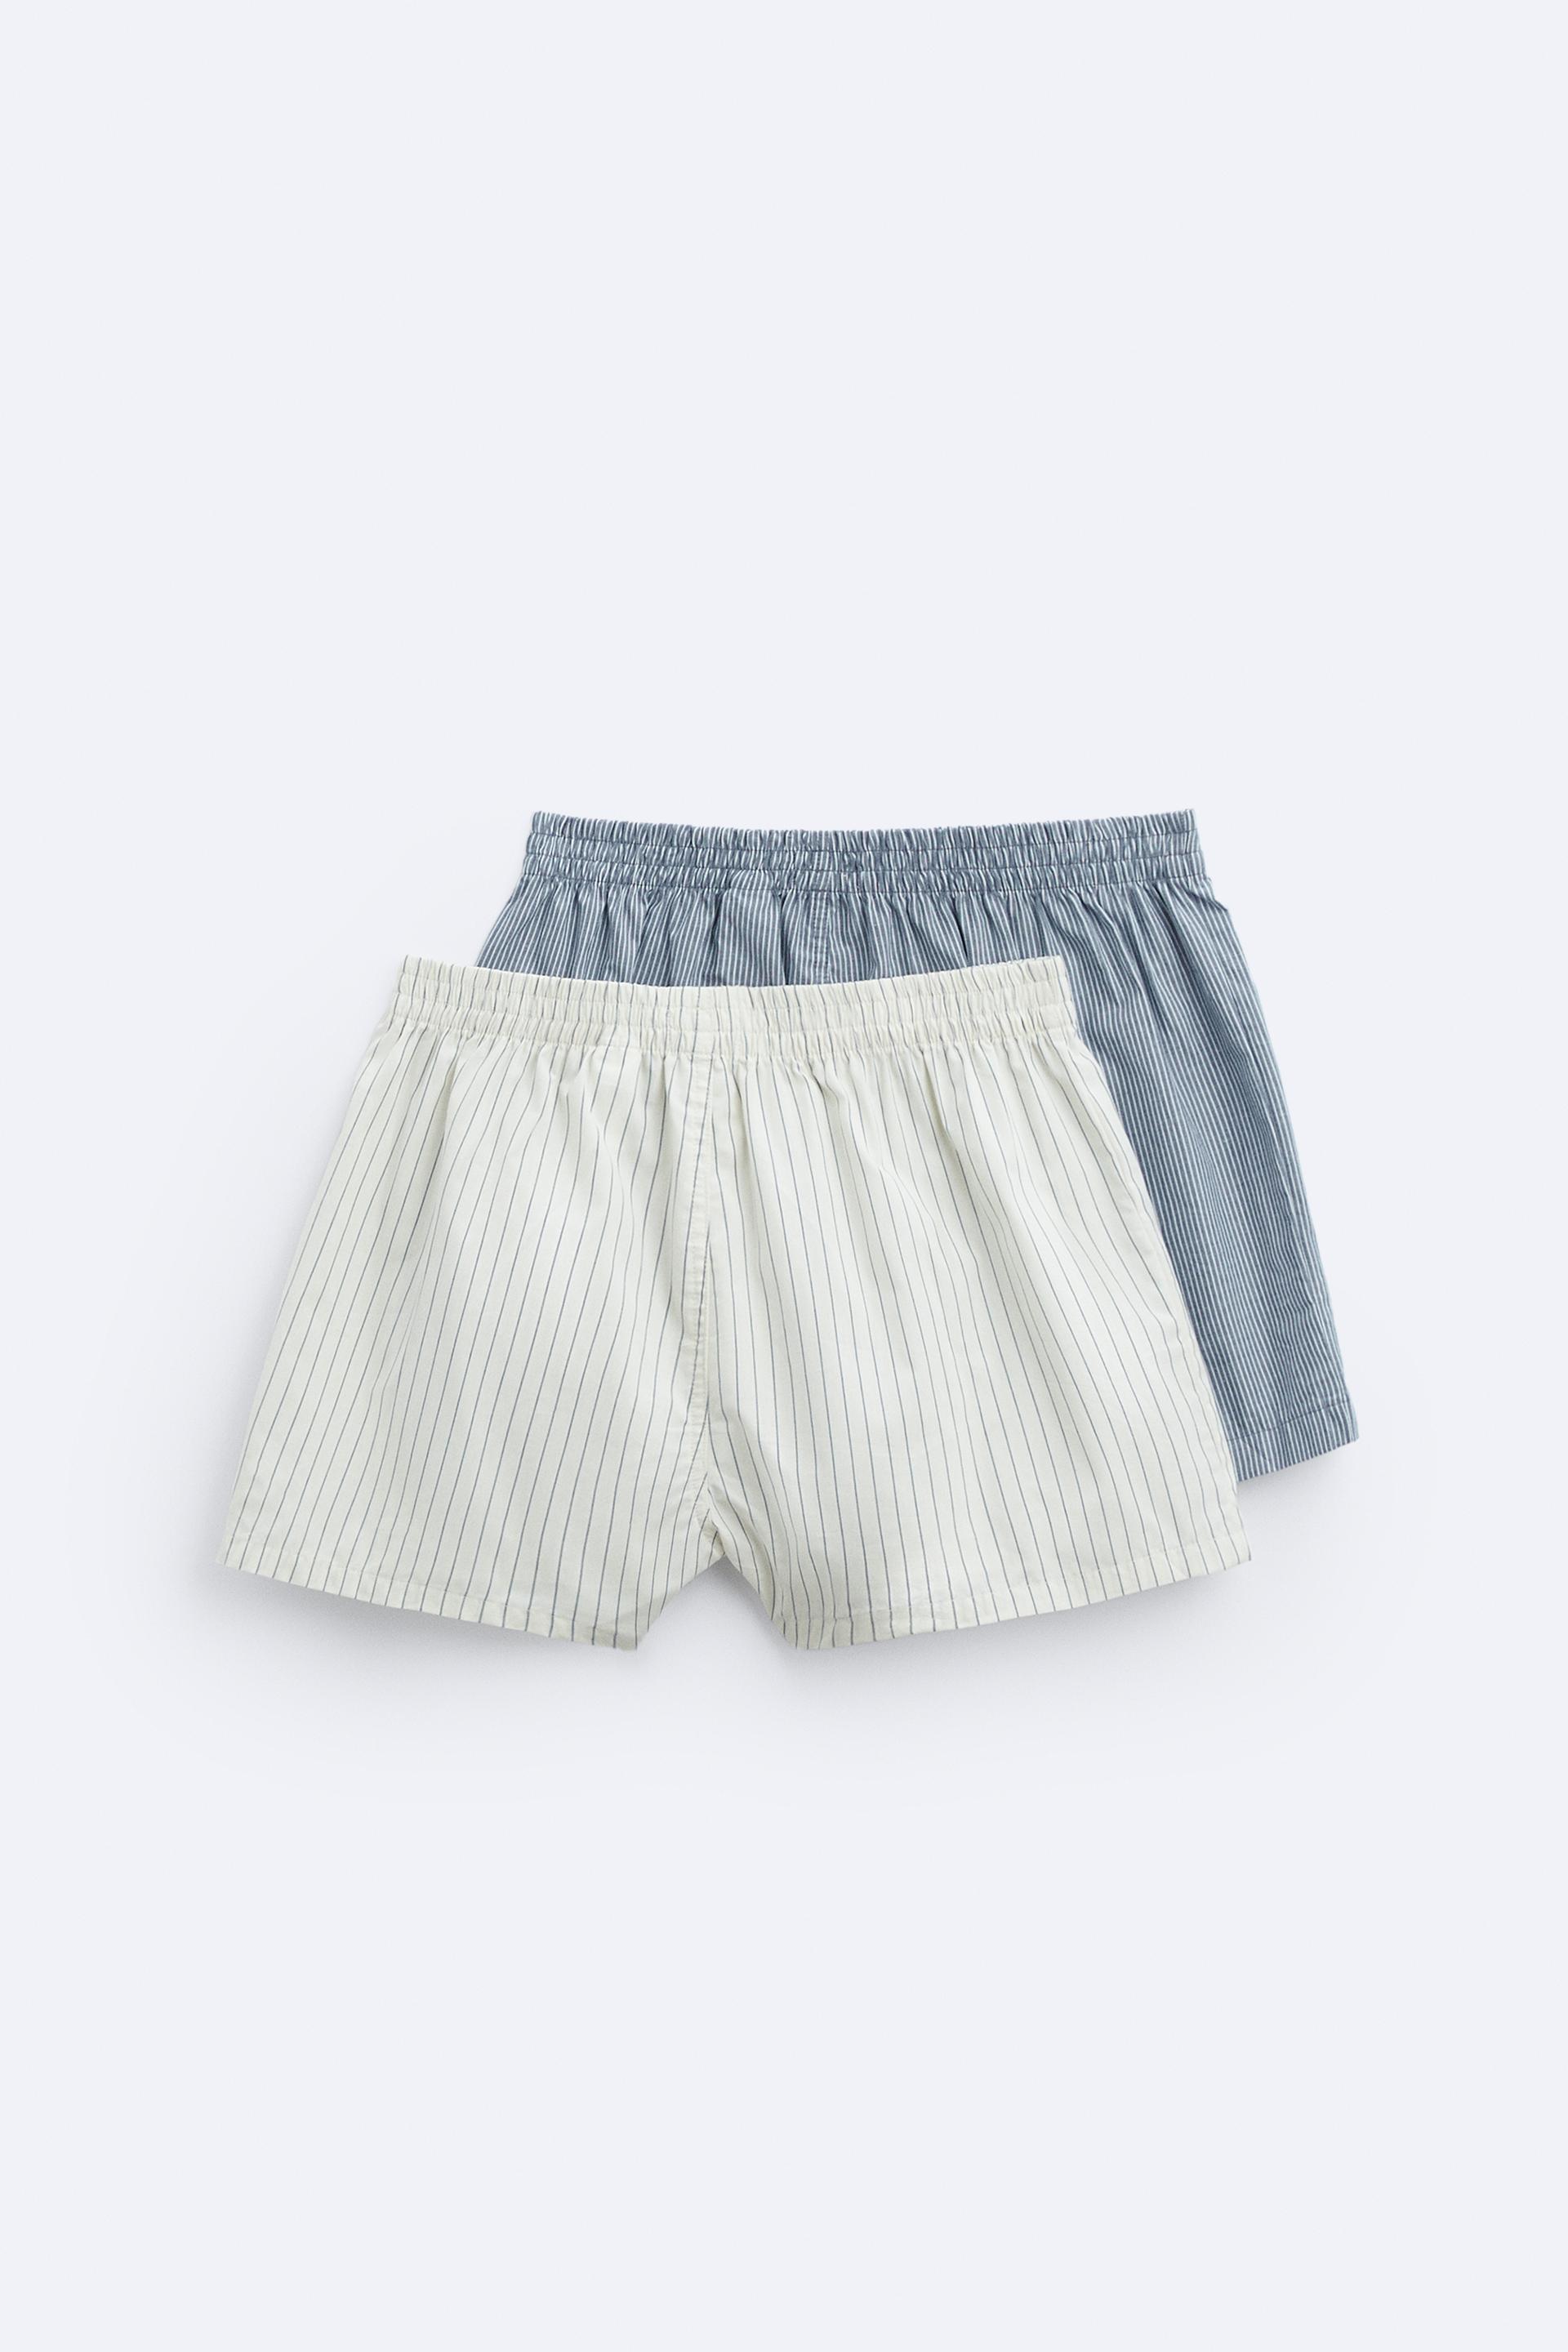 2 PACK OF MIXED POPLIN BOXERS